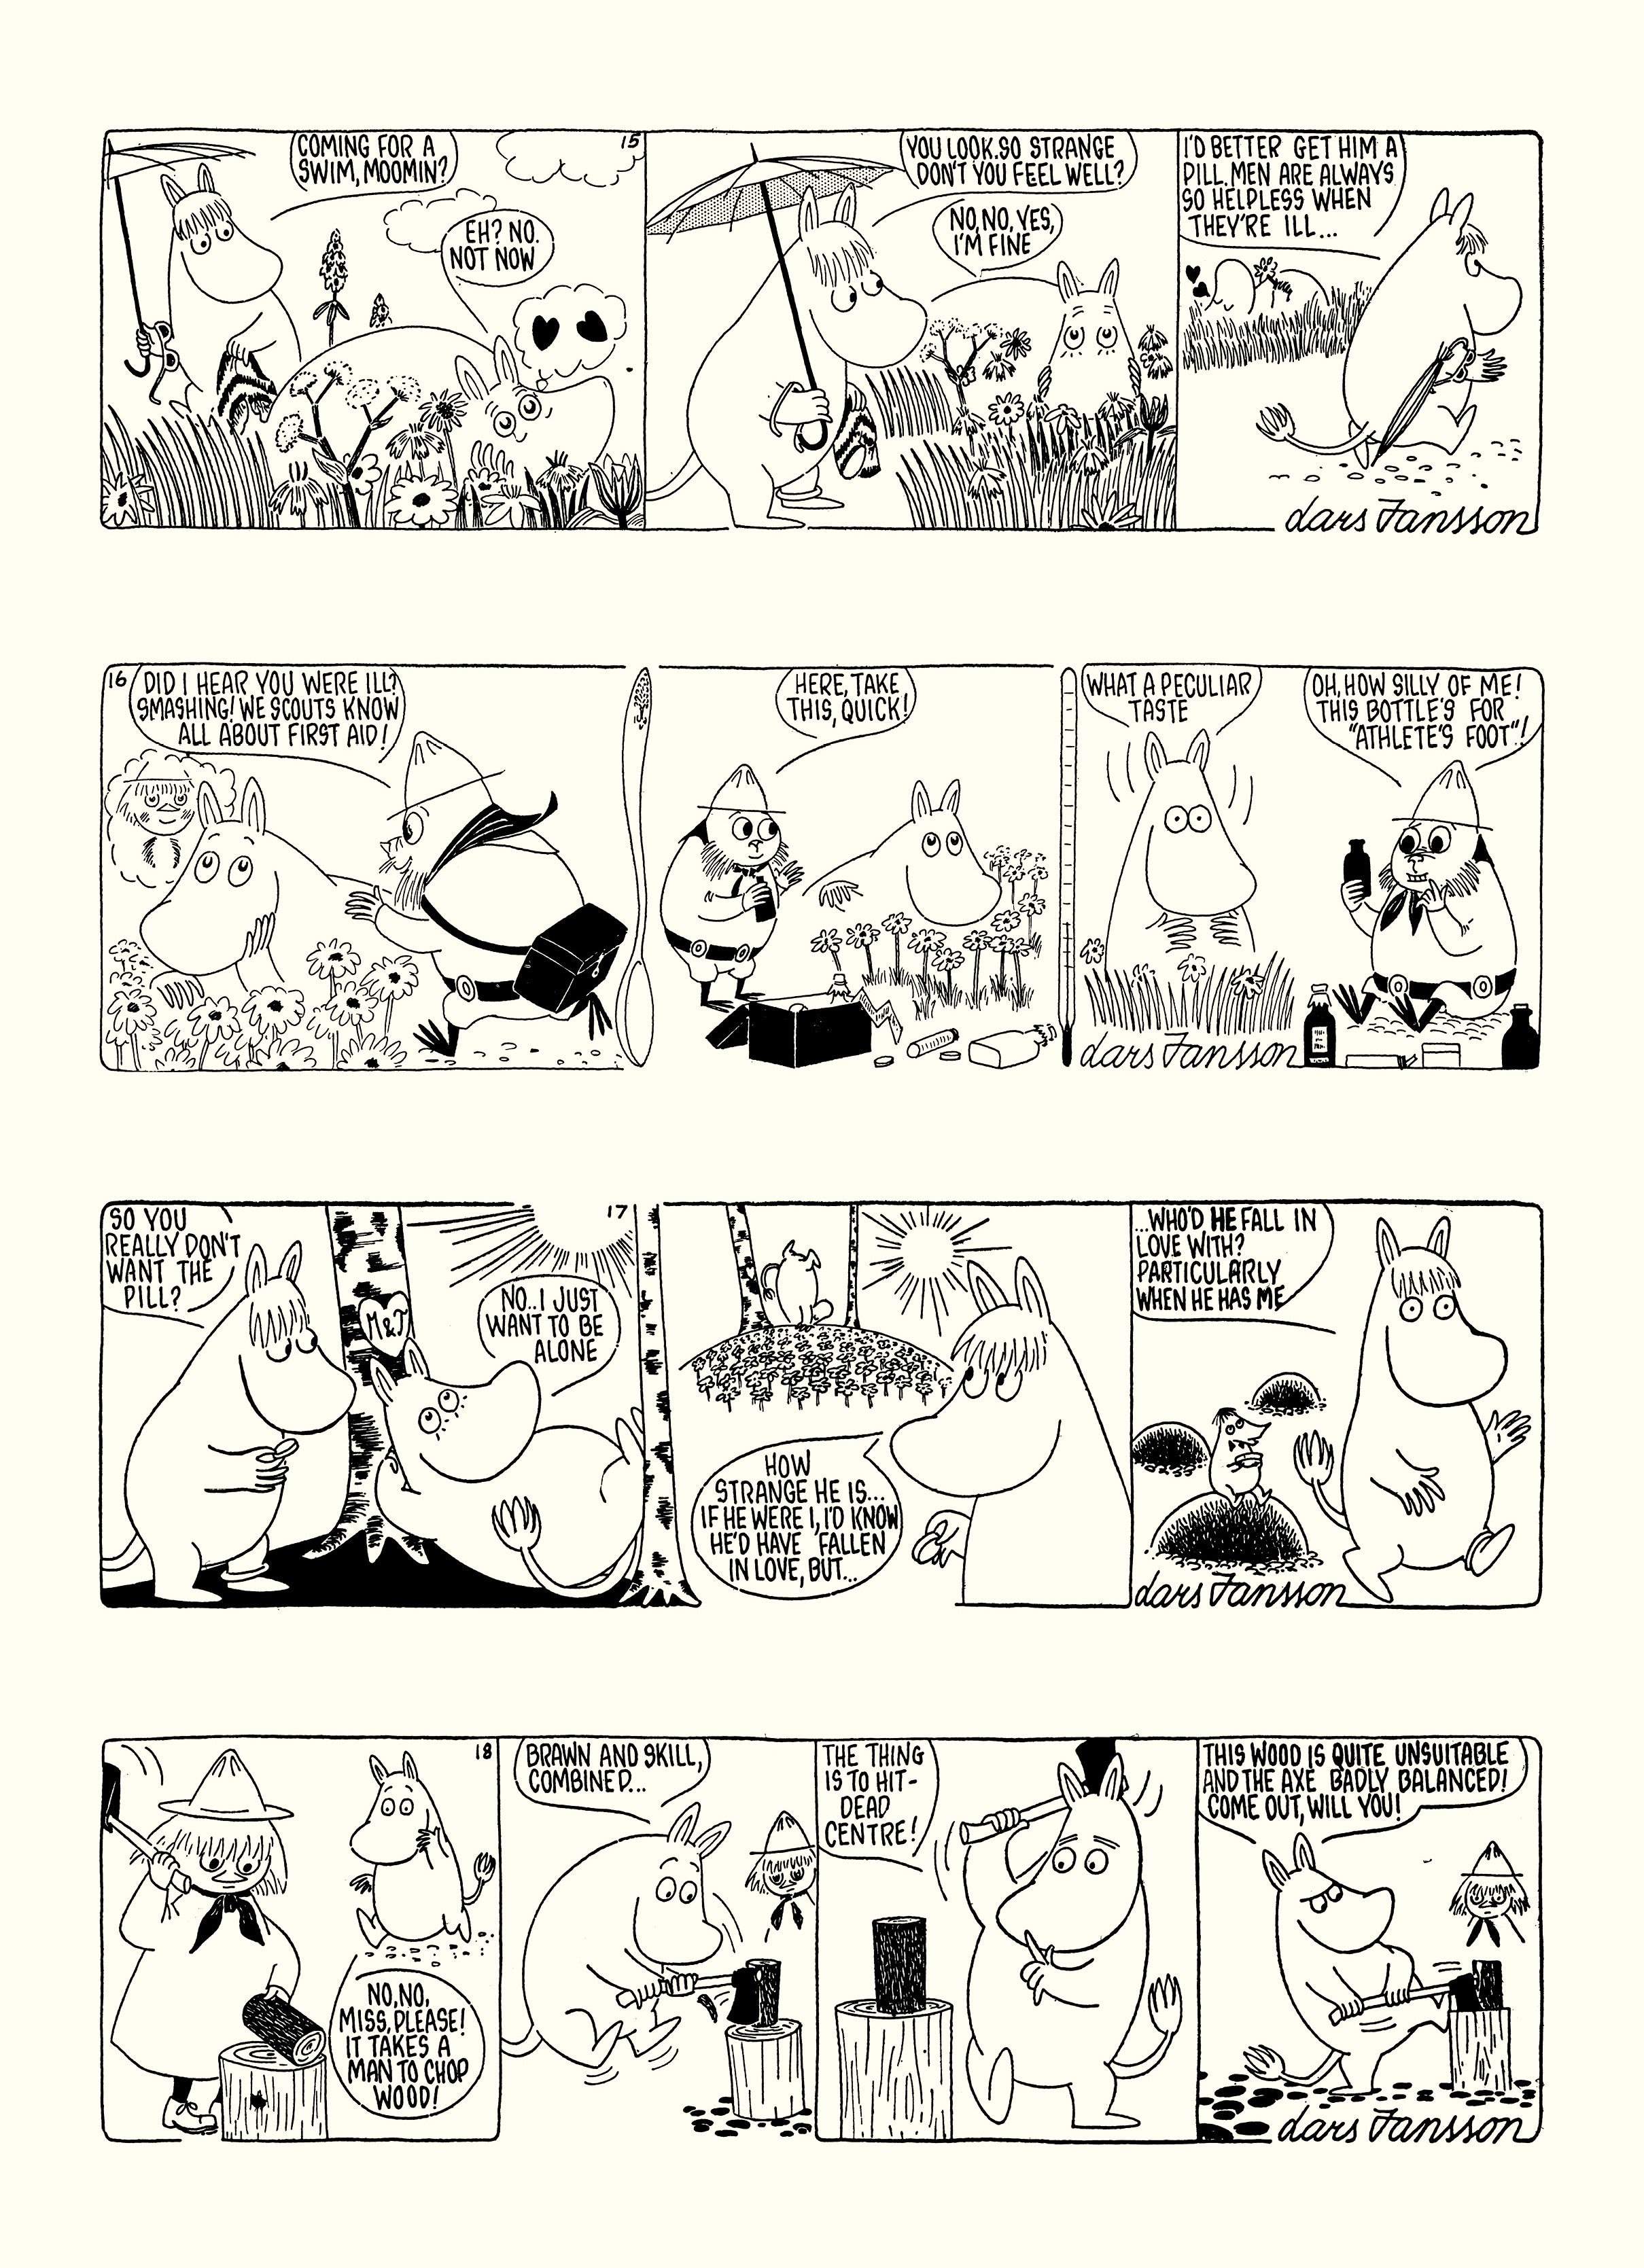 Read online Moomin: The Complete Lars Jansson Comic Strip comic -  Issue # TPB 7 - 31